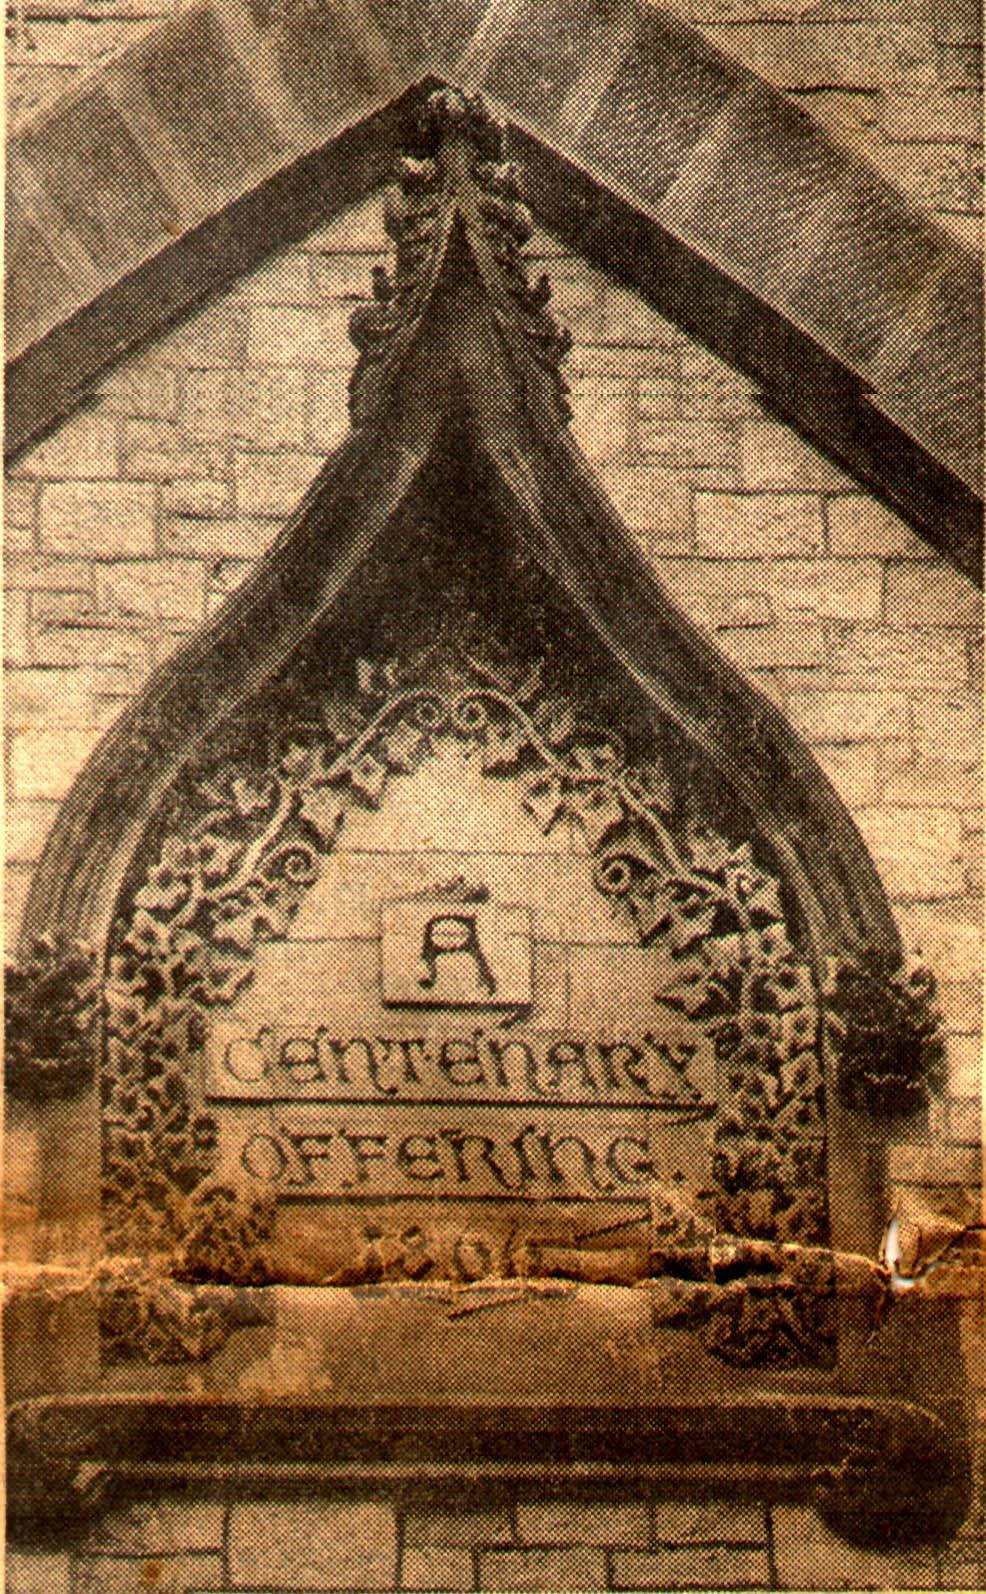 This plaque with vine motif the large façade window reads A Centenary Offering